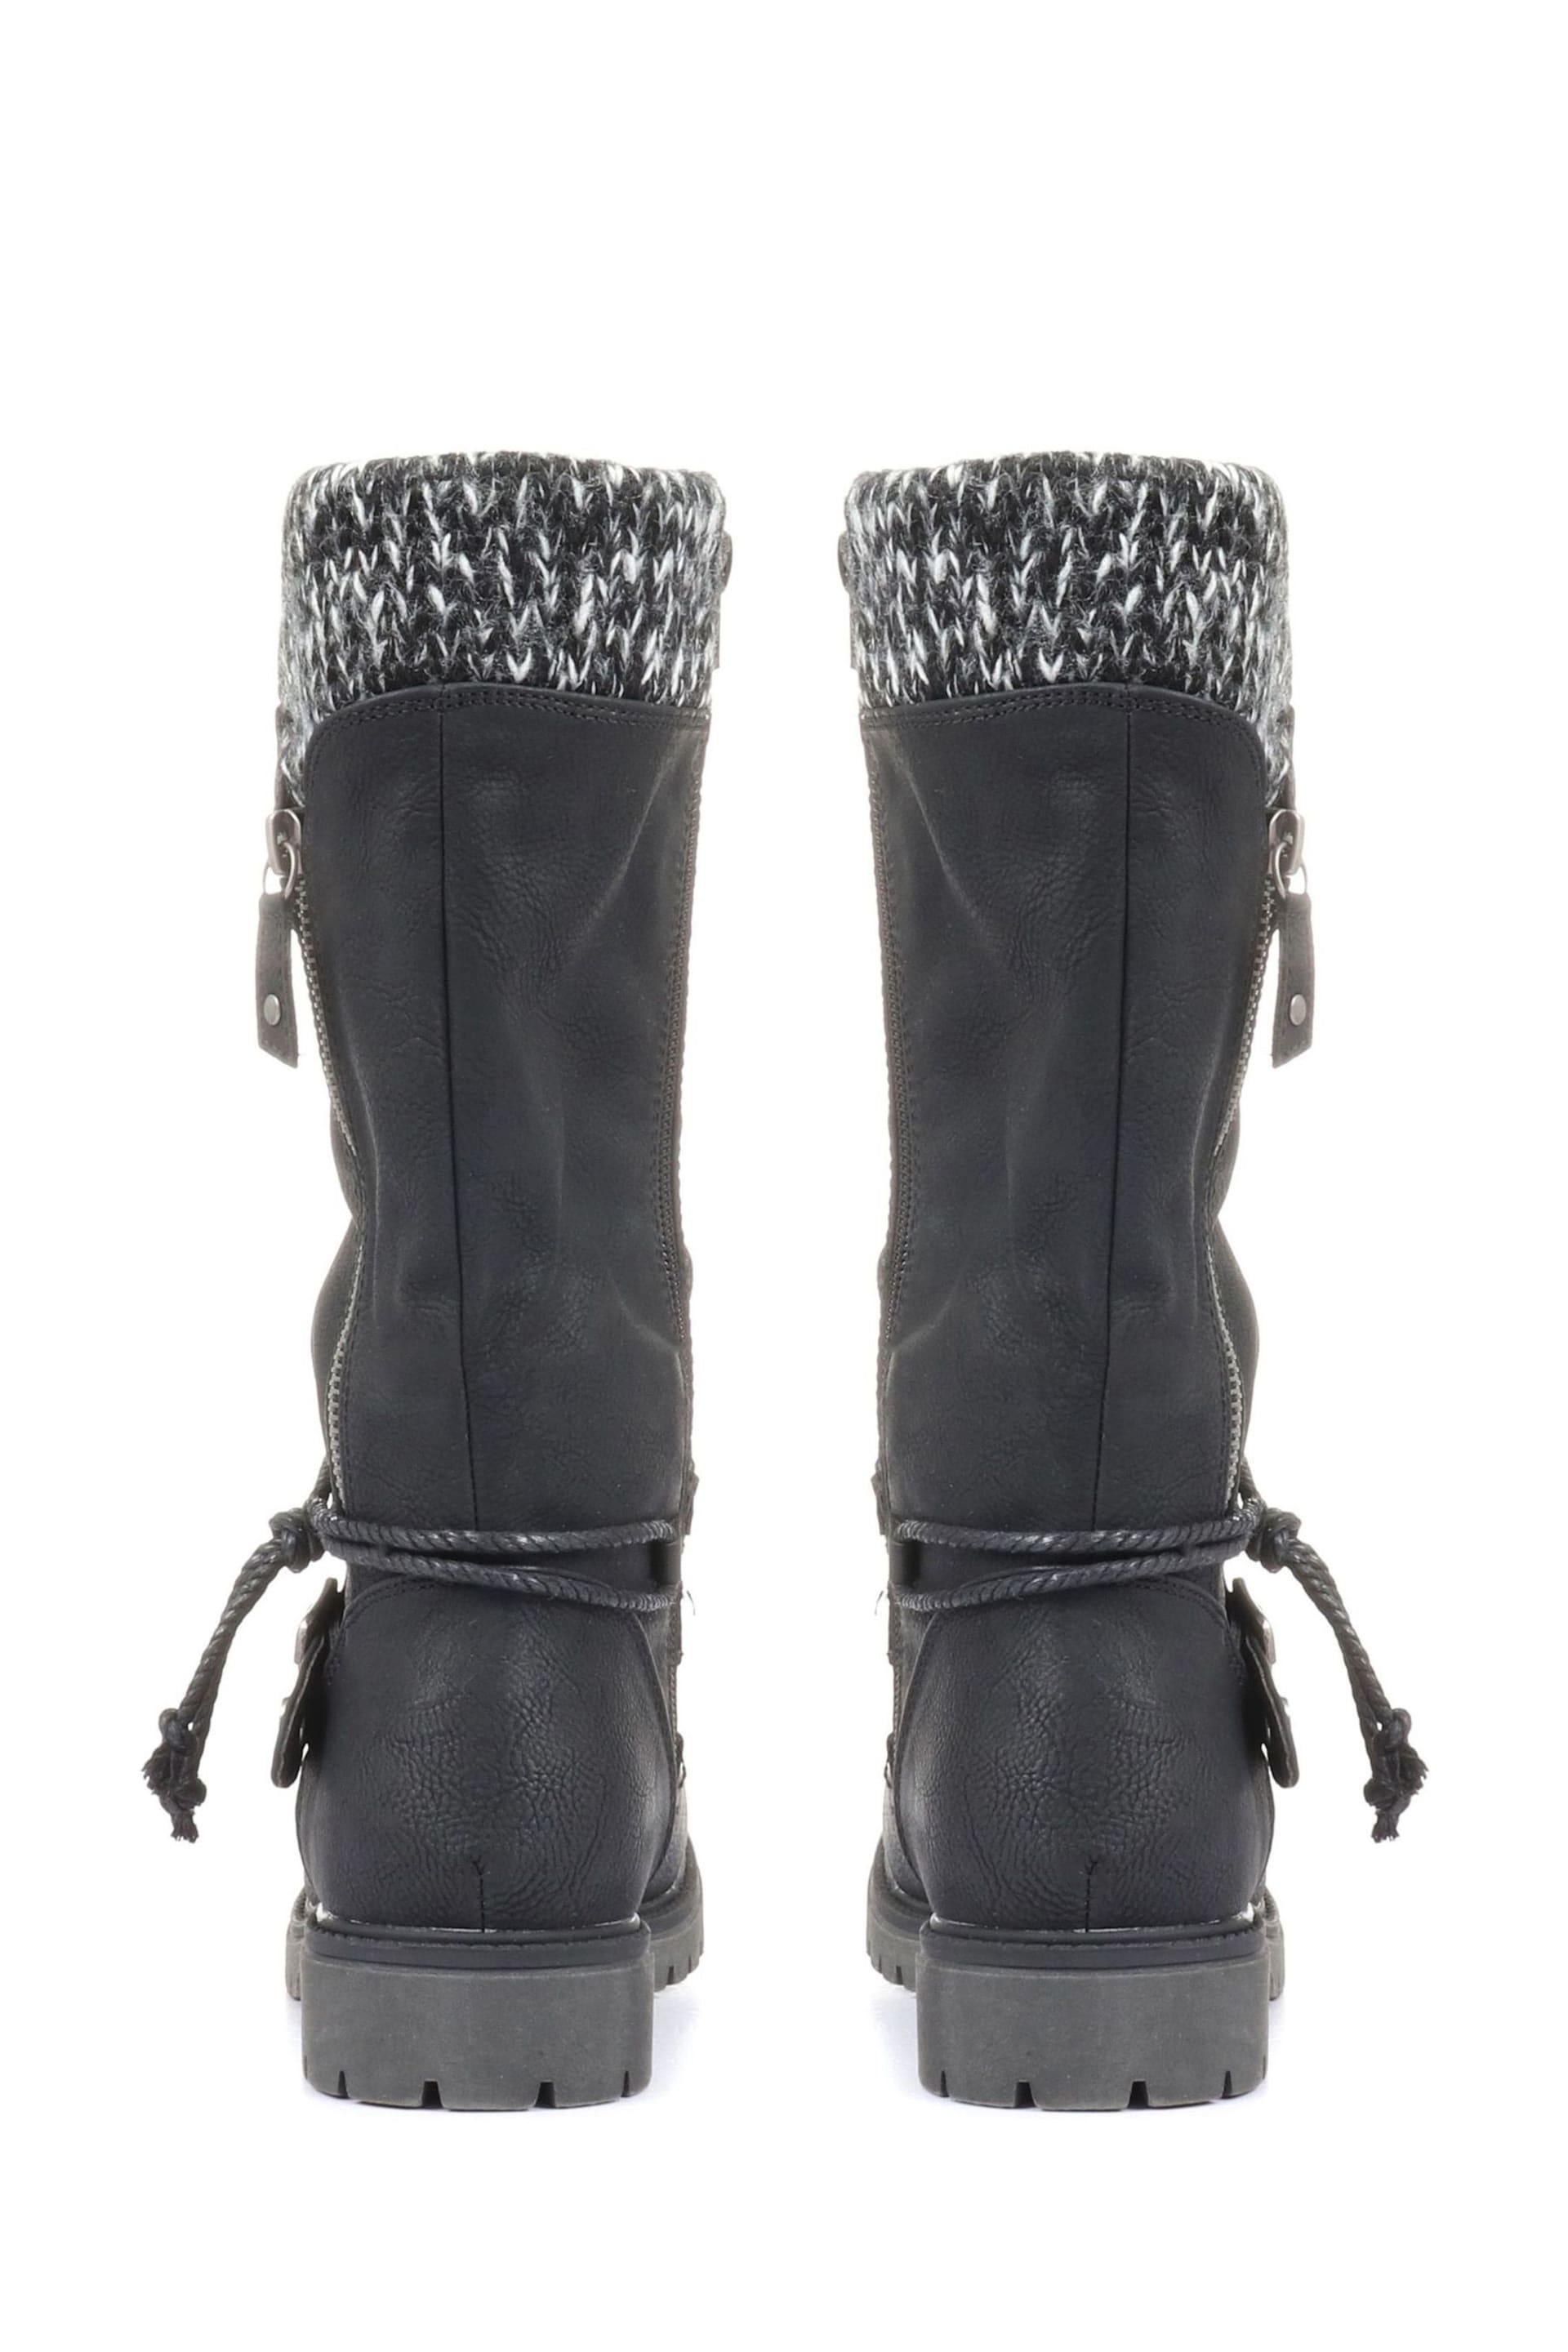 Pavers Womens Wide Fit Casual Mid Calf Boots - Image 3 of 5